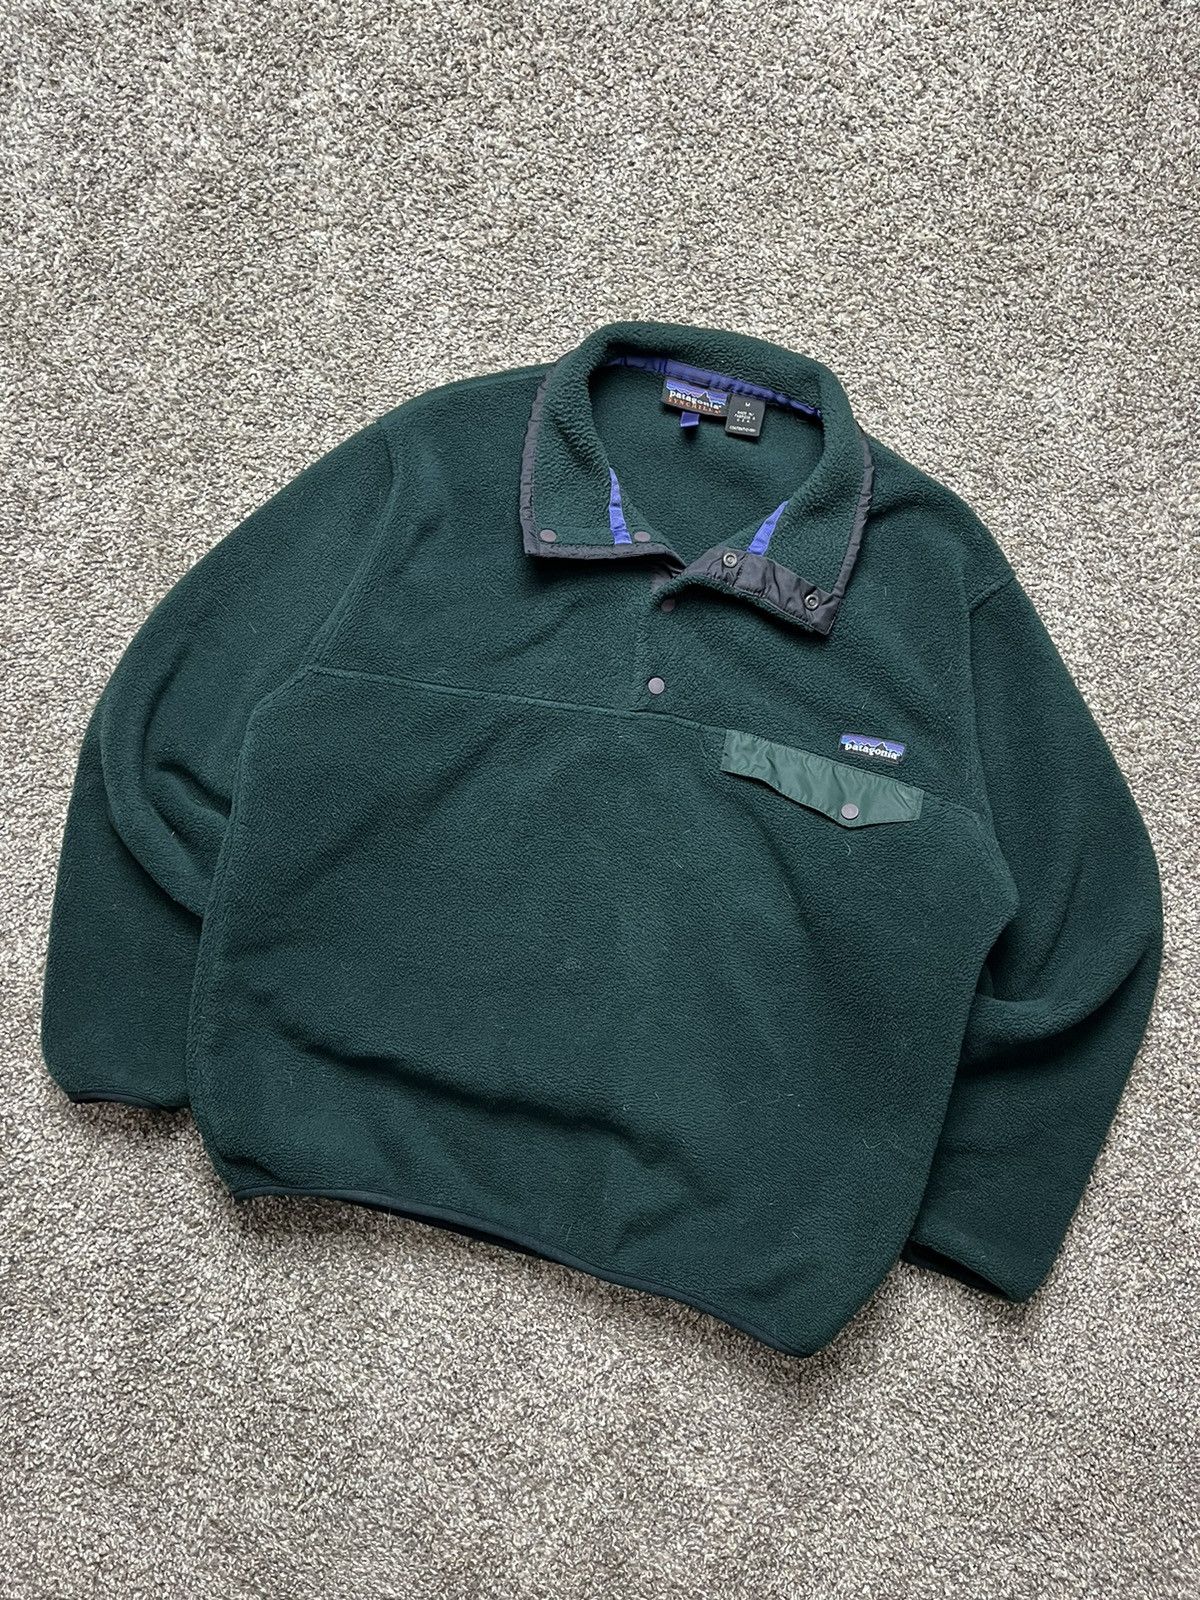 Vintage Vintage 90s USA Made Patagonia Green Synchilla Fleece Med Size US M / EU 48-50 / 2 - 1 Preview